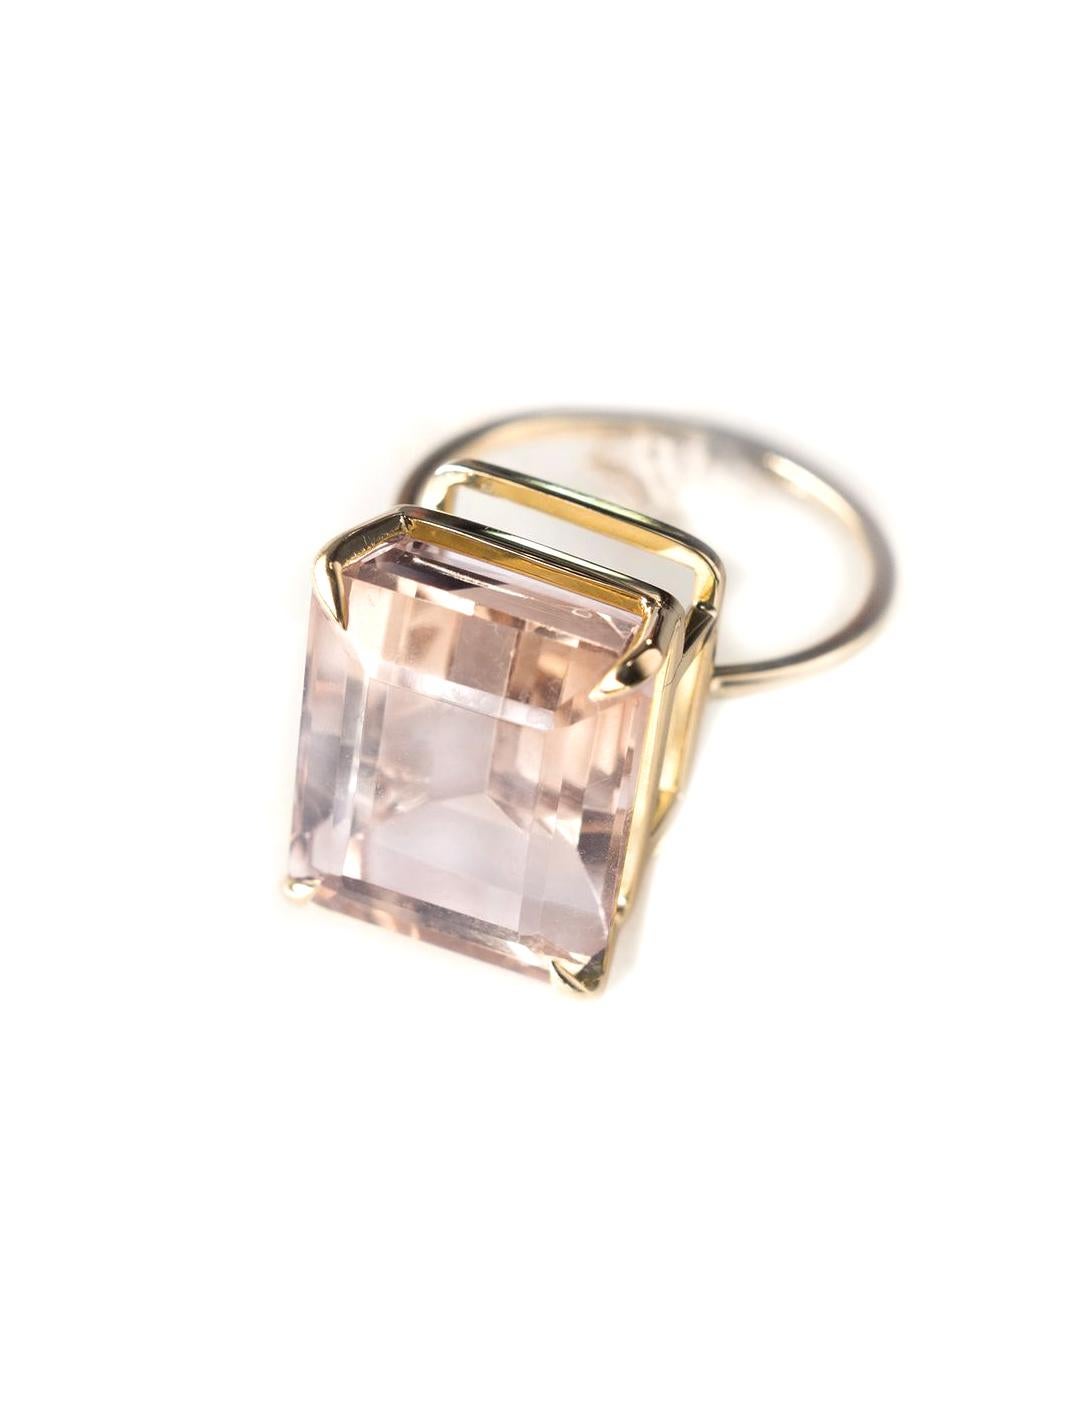 Eighteen Karat Yellow Gold Ring with Emerald Cut Morganite For Sale 2